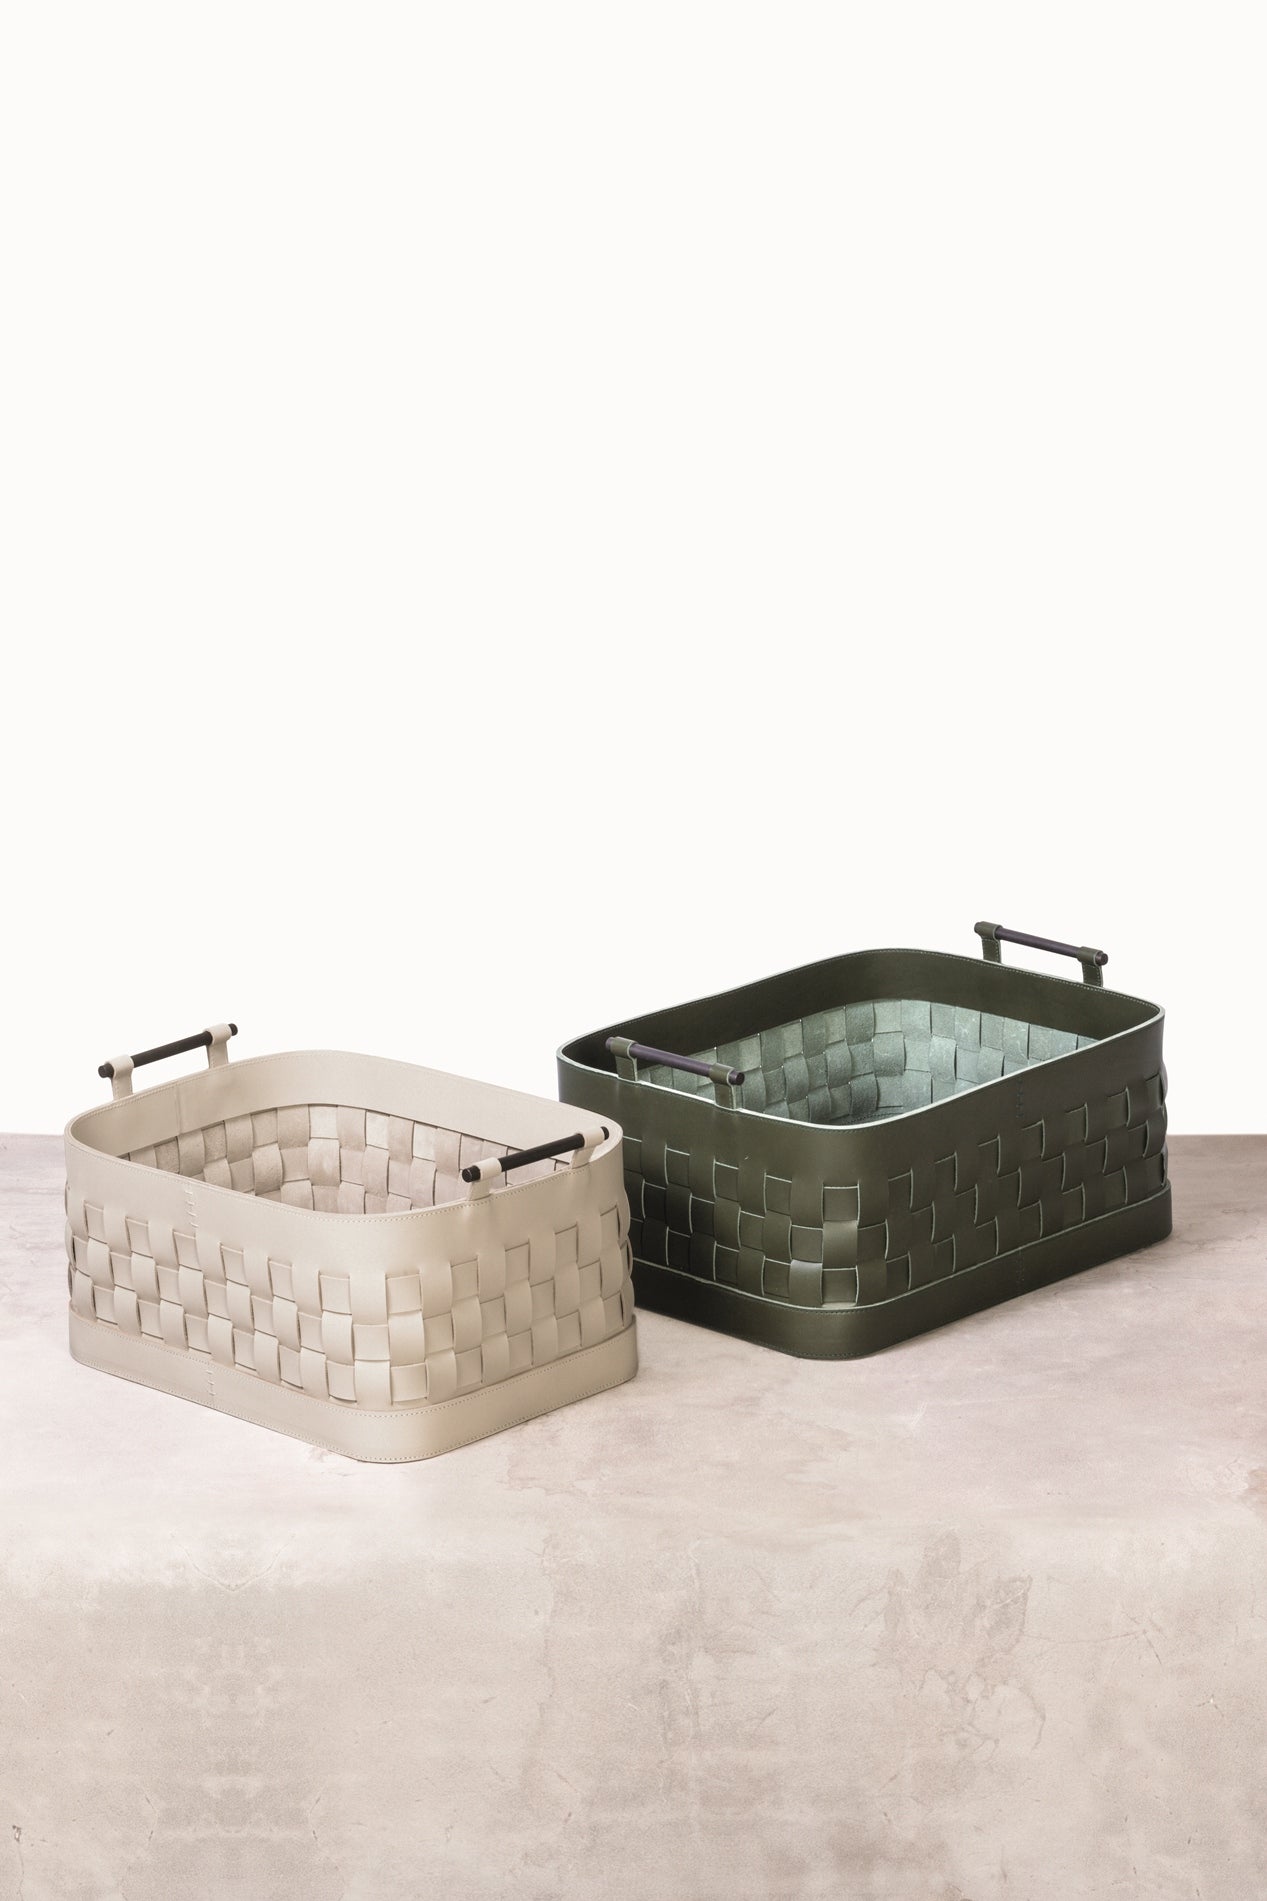 Rabitti 1969 Ravenna Rectangular Braided Water-Resistant Saddle Leather Storage Baskets | Elegant and Functional Storage Solution | Crafted with High-Quality Saddle Leather | Brushed Bronze Handles for a Touch of Luxury | Explore a Range of Luxury Home Accessories at 2Jour Concierge, #1 luxury high-end gift & lifestyle shop